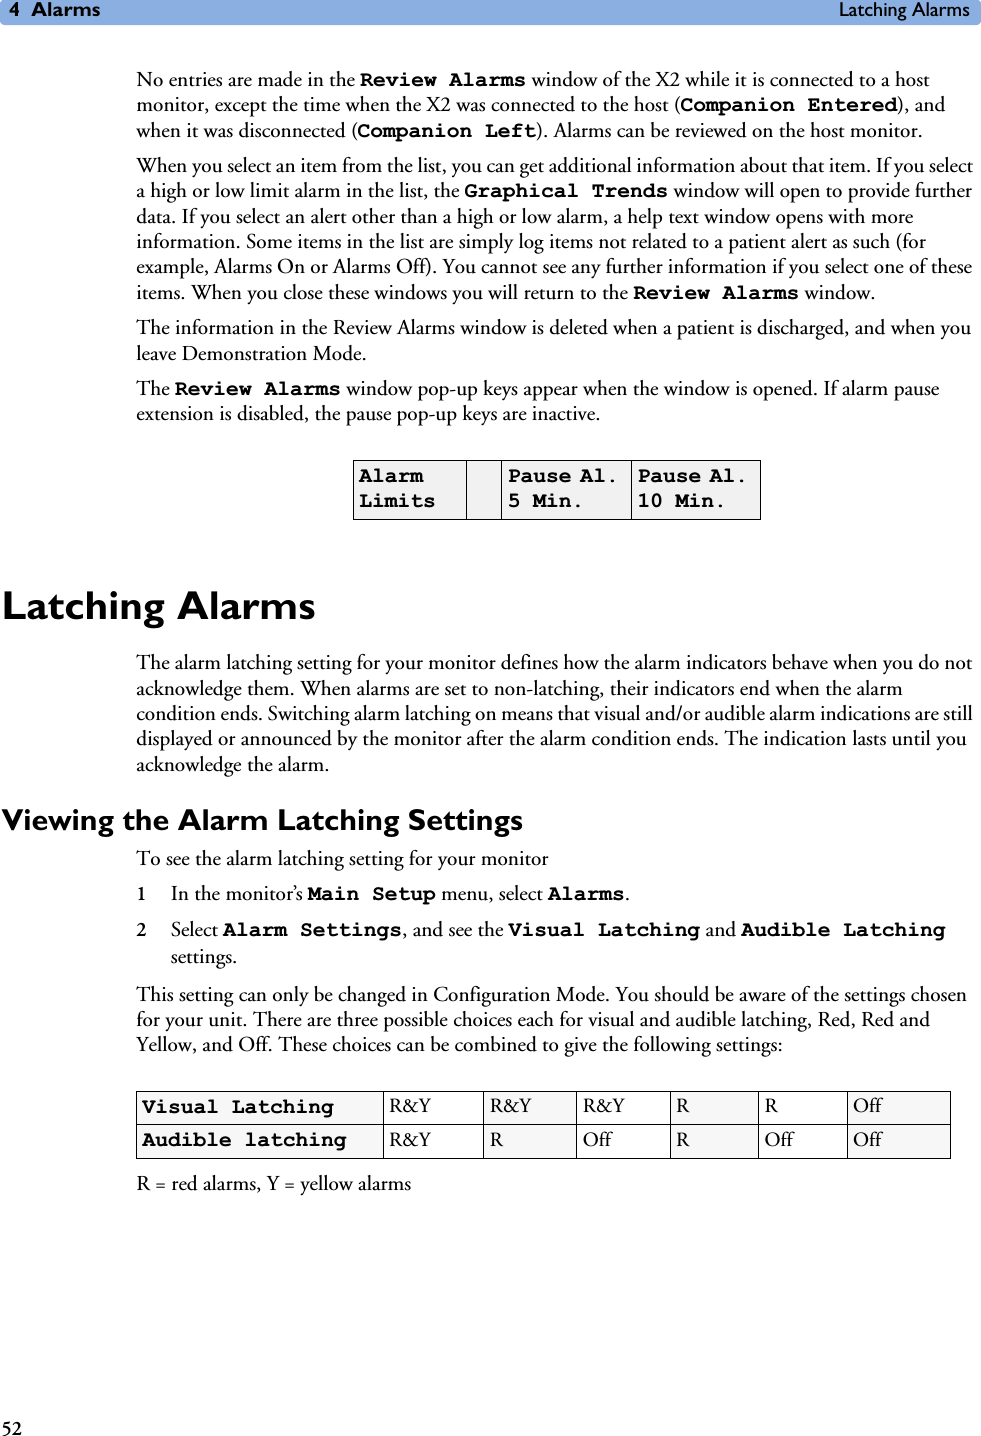 4Alarms Latching Alarms52No entries are made in the Review Alarms window of the X2 while it is connected to a host monitor, except the time when the X2 was connected to the host (Companion Entered), and when it was disconnected (Companion Left). Alarms can be reviewed on the host monitor.When you select an item from the list, you can get additional information about that item. If you select a high or low limit alarm in the list, the Graphical Trends window will open to provide further data. If you select an alert other than a high or low alarm, a help text window opens with more information. Some items in the list are simply log items not related to a patient alert as such (for example, Alarms On or Alarms Off). You cannot see any further information if you select one of these items. When you close these windows you will return to the Review Alarms window.The information in the Review Alarms window is deleted when a patient is discharged, and when you leave Demonstration Mode. The Review Alarms window pop-up keys appear when the window is opened. If alarm pause extension is disabled, the pause pop-up keys are inactive.Latching AlarmsThe alarm latching setting for your monitor defines how the alarm indicators behave when you do not acknowledge them. When alarms are set to non-latching, their indicators end when the alarm condition ends. Switching alarm latching on means that visual and/or audible alarm indications are still displayed or announced by the monitor after the alarm condition ends. The indication lasts until you acknowledge the alarm. Viewing the Alarm Latching SettingsTo see the alarm latching setting for your monitor 1In the monitor’s Main Setup menu, select Alarms.2Select Alarm Settings, and see the Visual Latching and Audible Latching settings.This setting can only be changed in Configuration Mode. You should be aware of the settings chosen for your unit. There are three possible choices each for visual and audible latching, Red, Red and Yellow, and Off. These choices can be combined to give the following settings:R = red alarms, Y = yellow alarmsAlarm Limits Pause Al. 5 Min.Pause Al. 10 Min.Visual Latching R&amp;Y R&amp;Y R&amp;Y RROffAudible latching R&amp;Y ROffROffOff